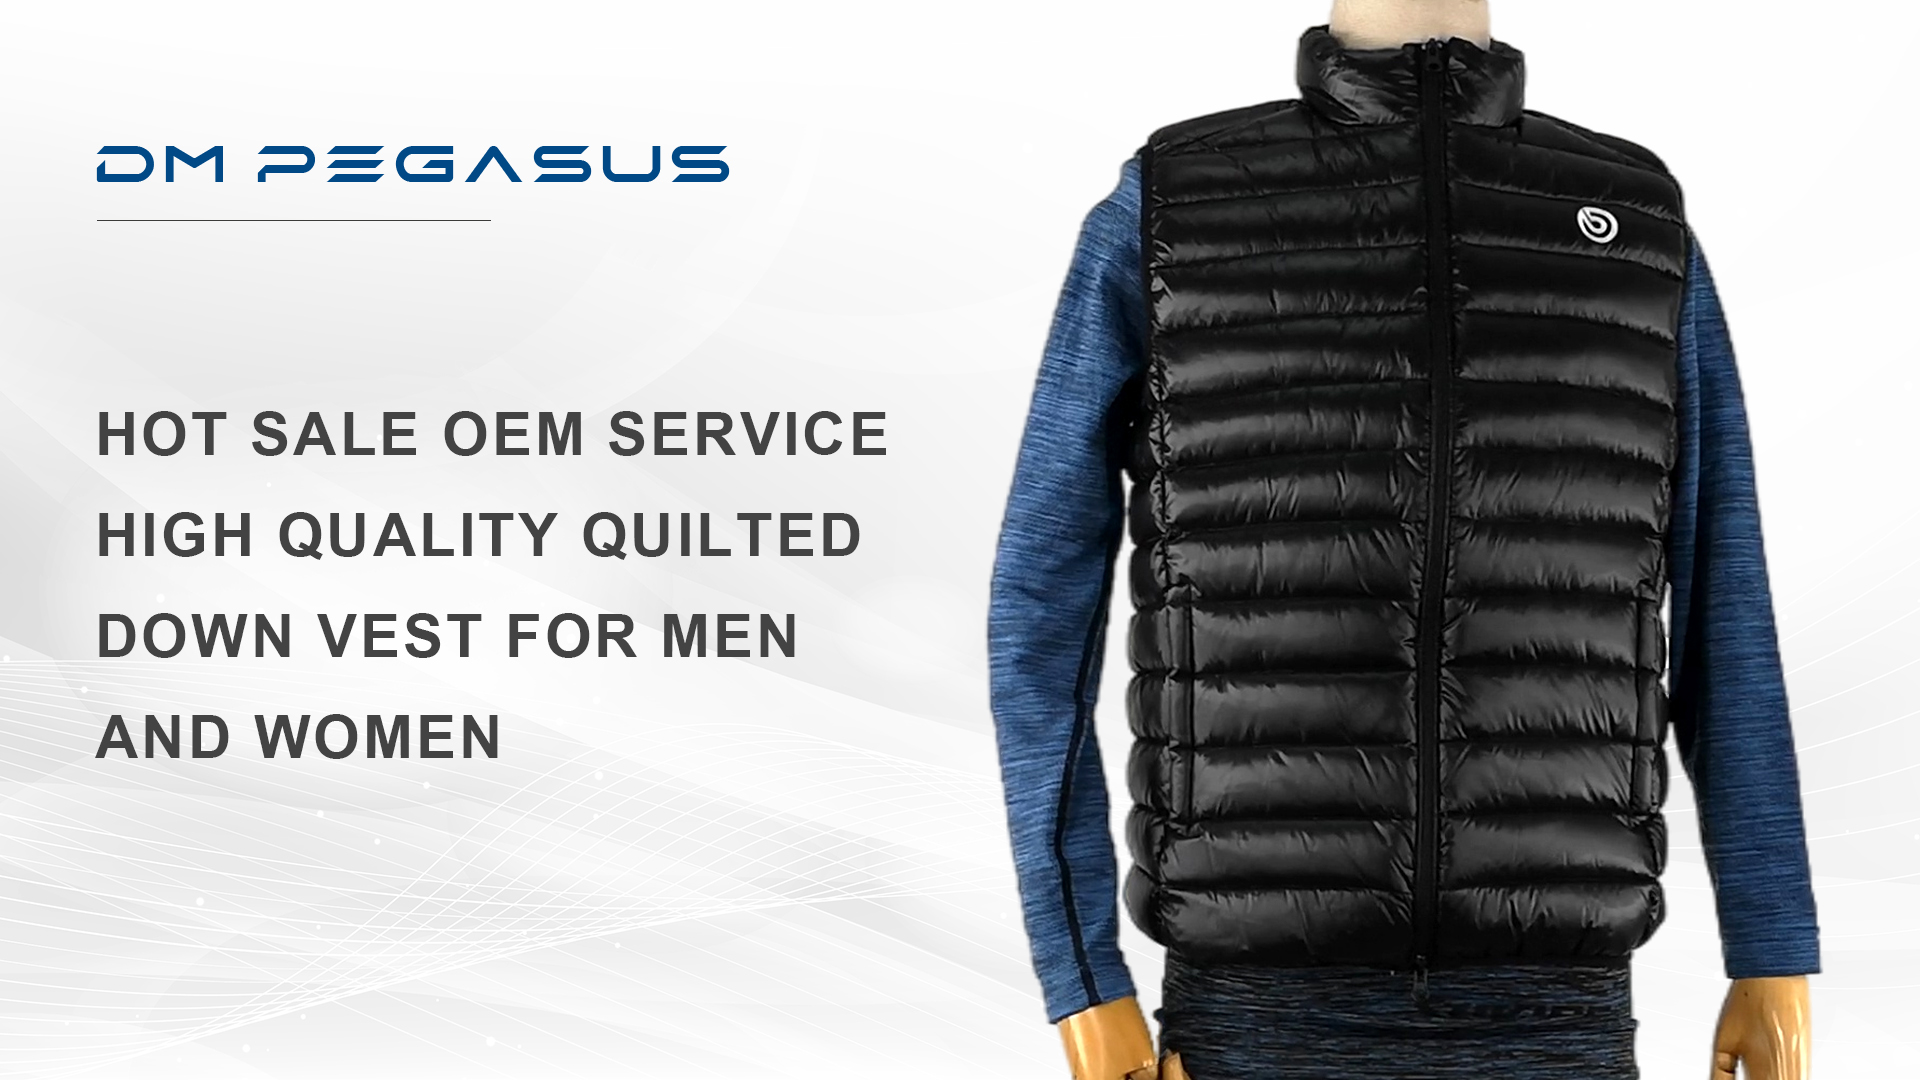 Hot Sale OEM Service High-Quality Quilted Down Vest For Men and Women